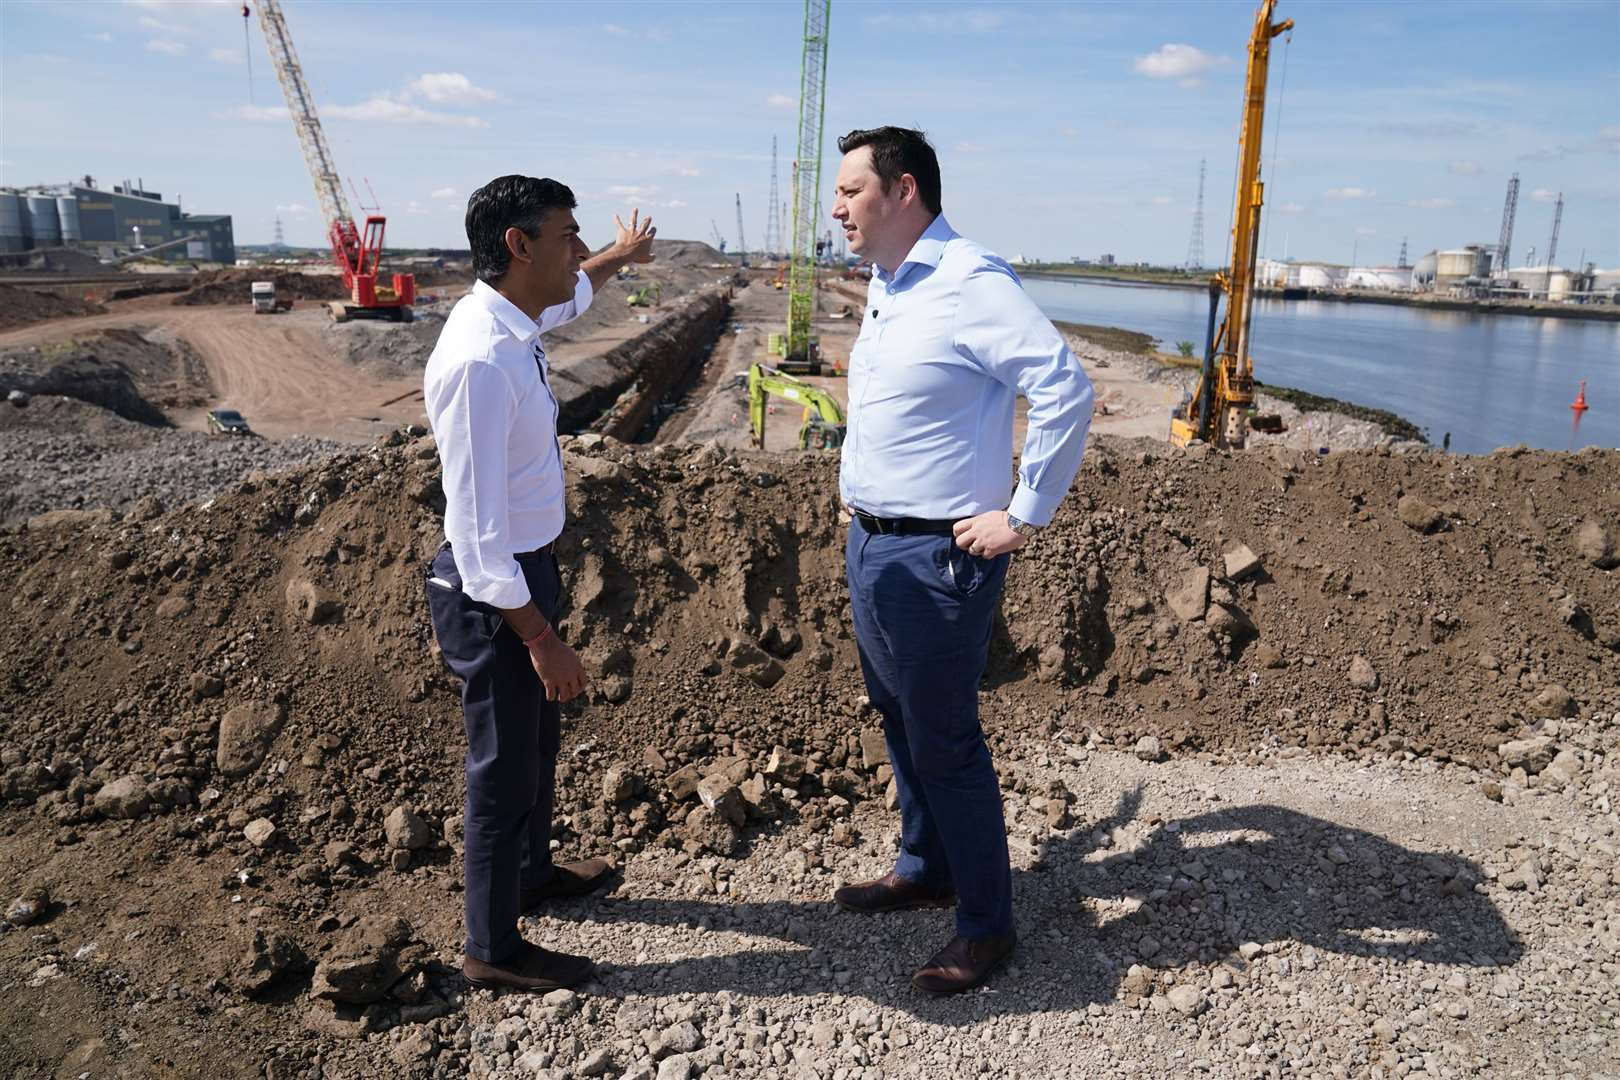 Rishi Sunak (left) speaks with Tees Valley Mayor, Ben Houchen, during a visit to Teesside Freeport, Teesworks, in Redcar (Owen Humphreys/PA)